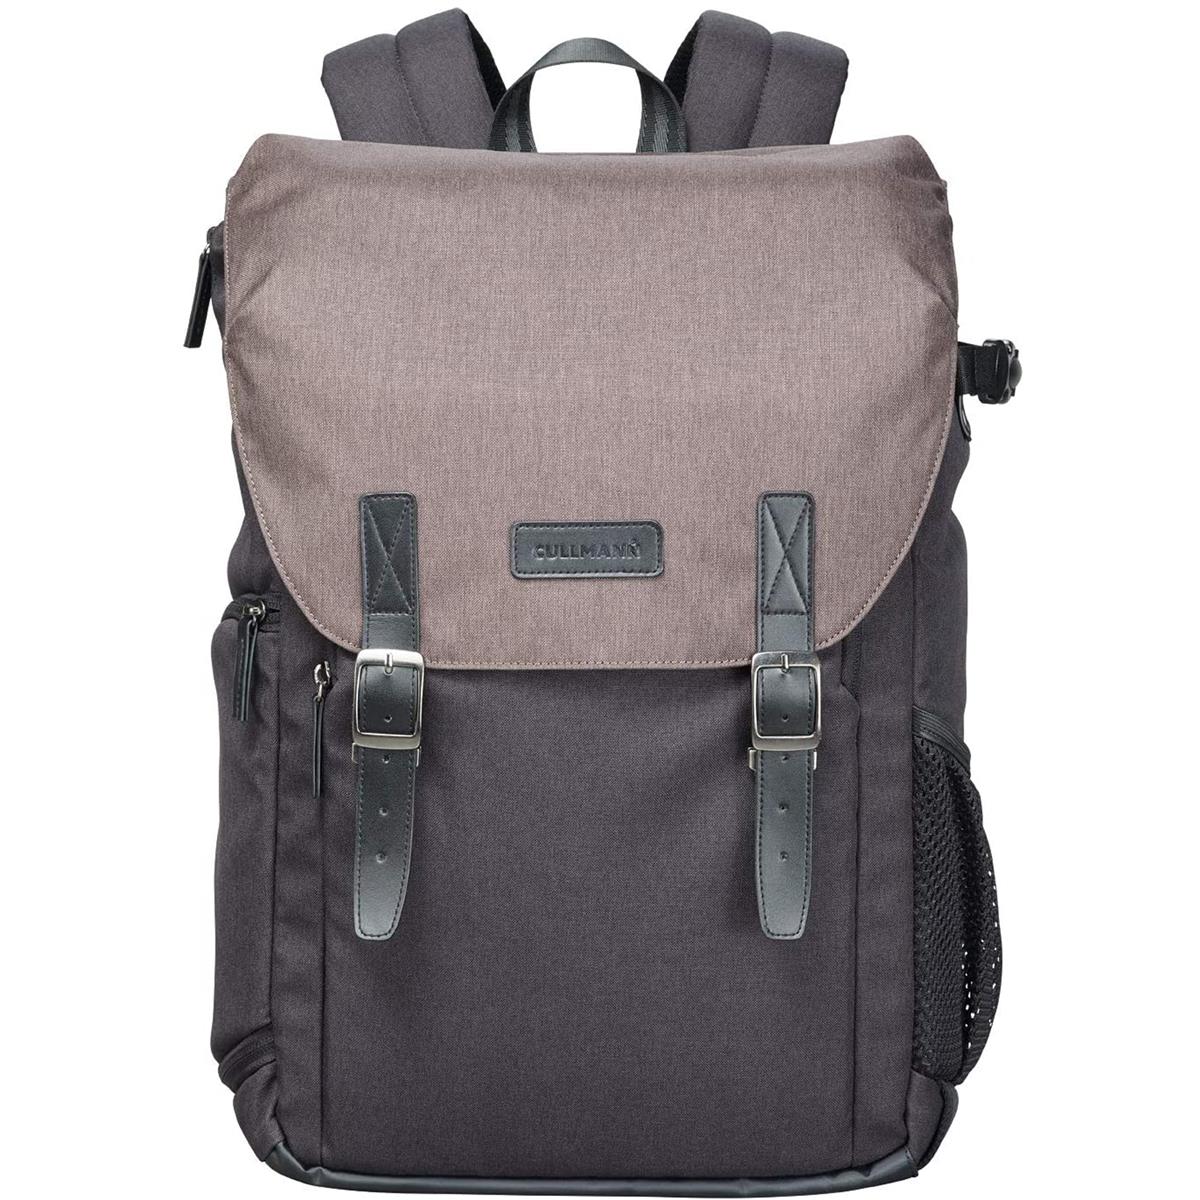 Image of Cullmann Bristol DayPack 600+ Camera Backpack